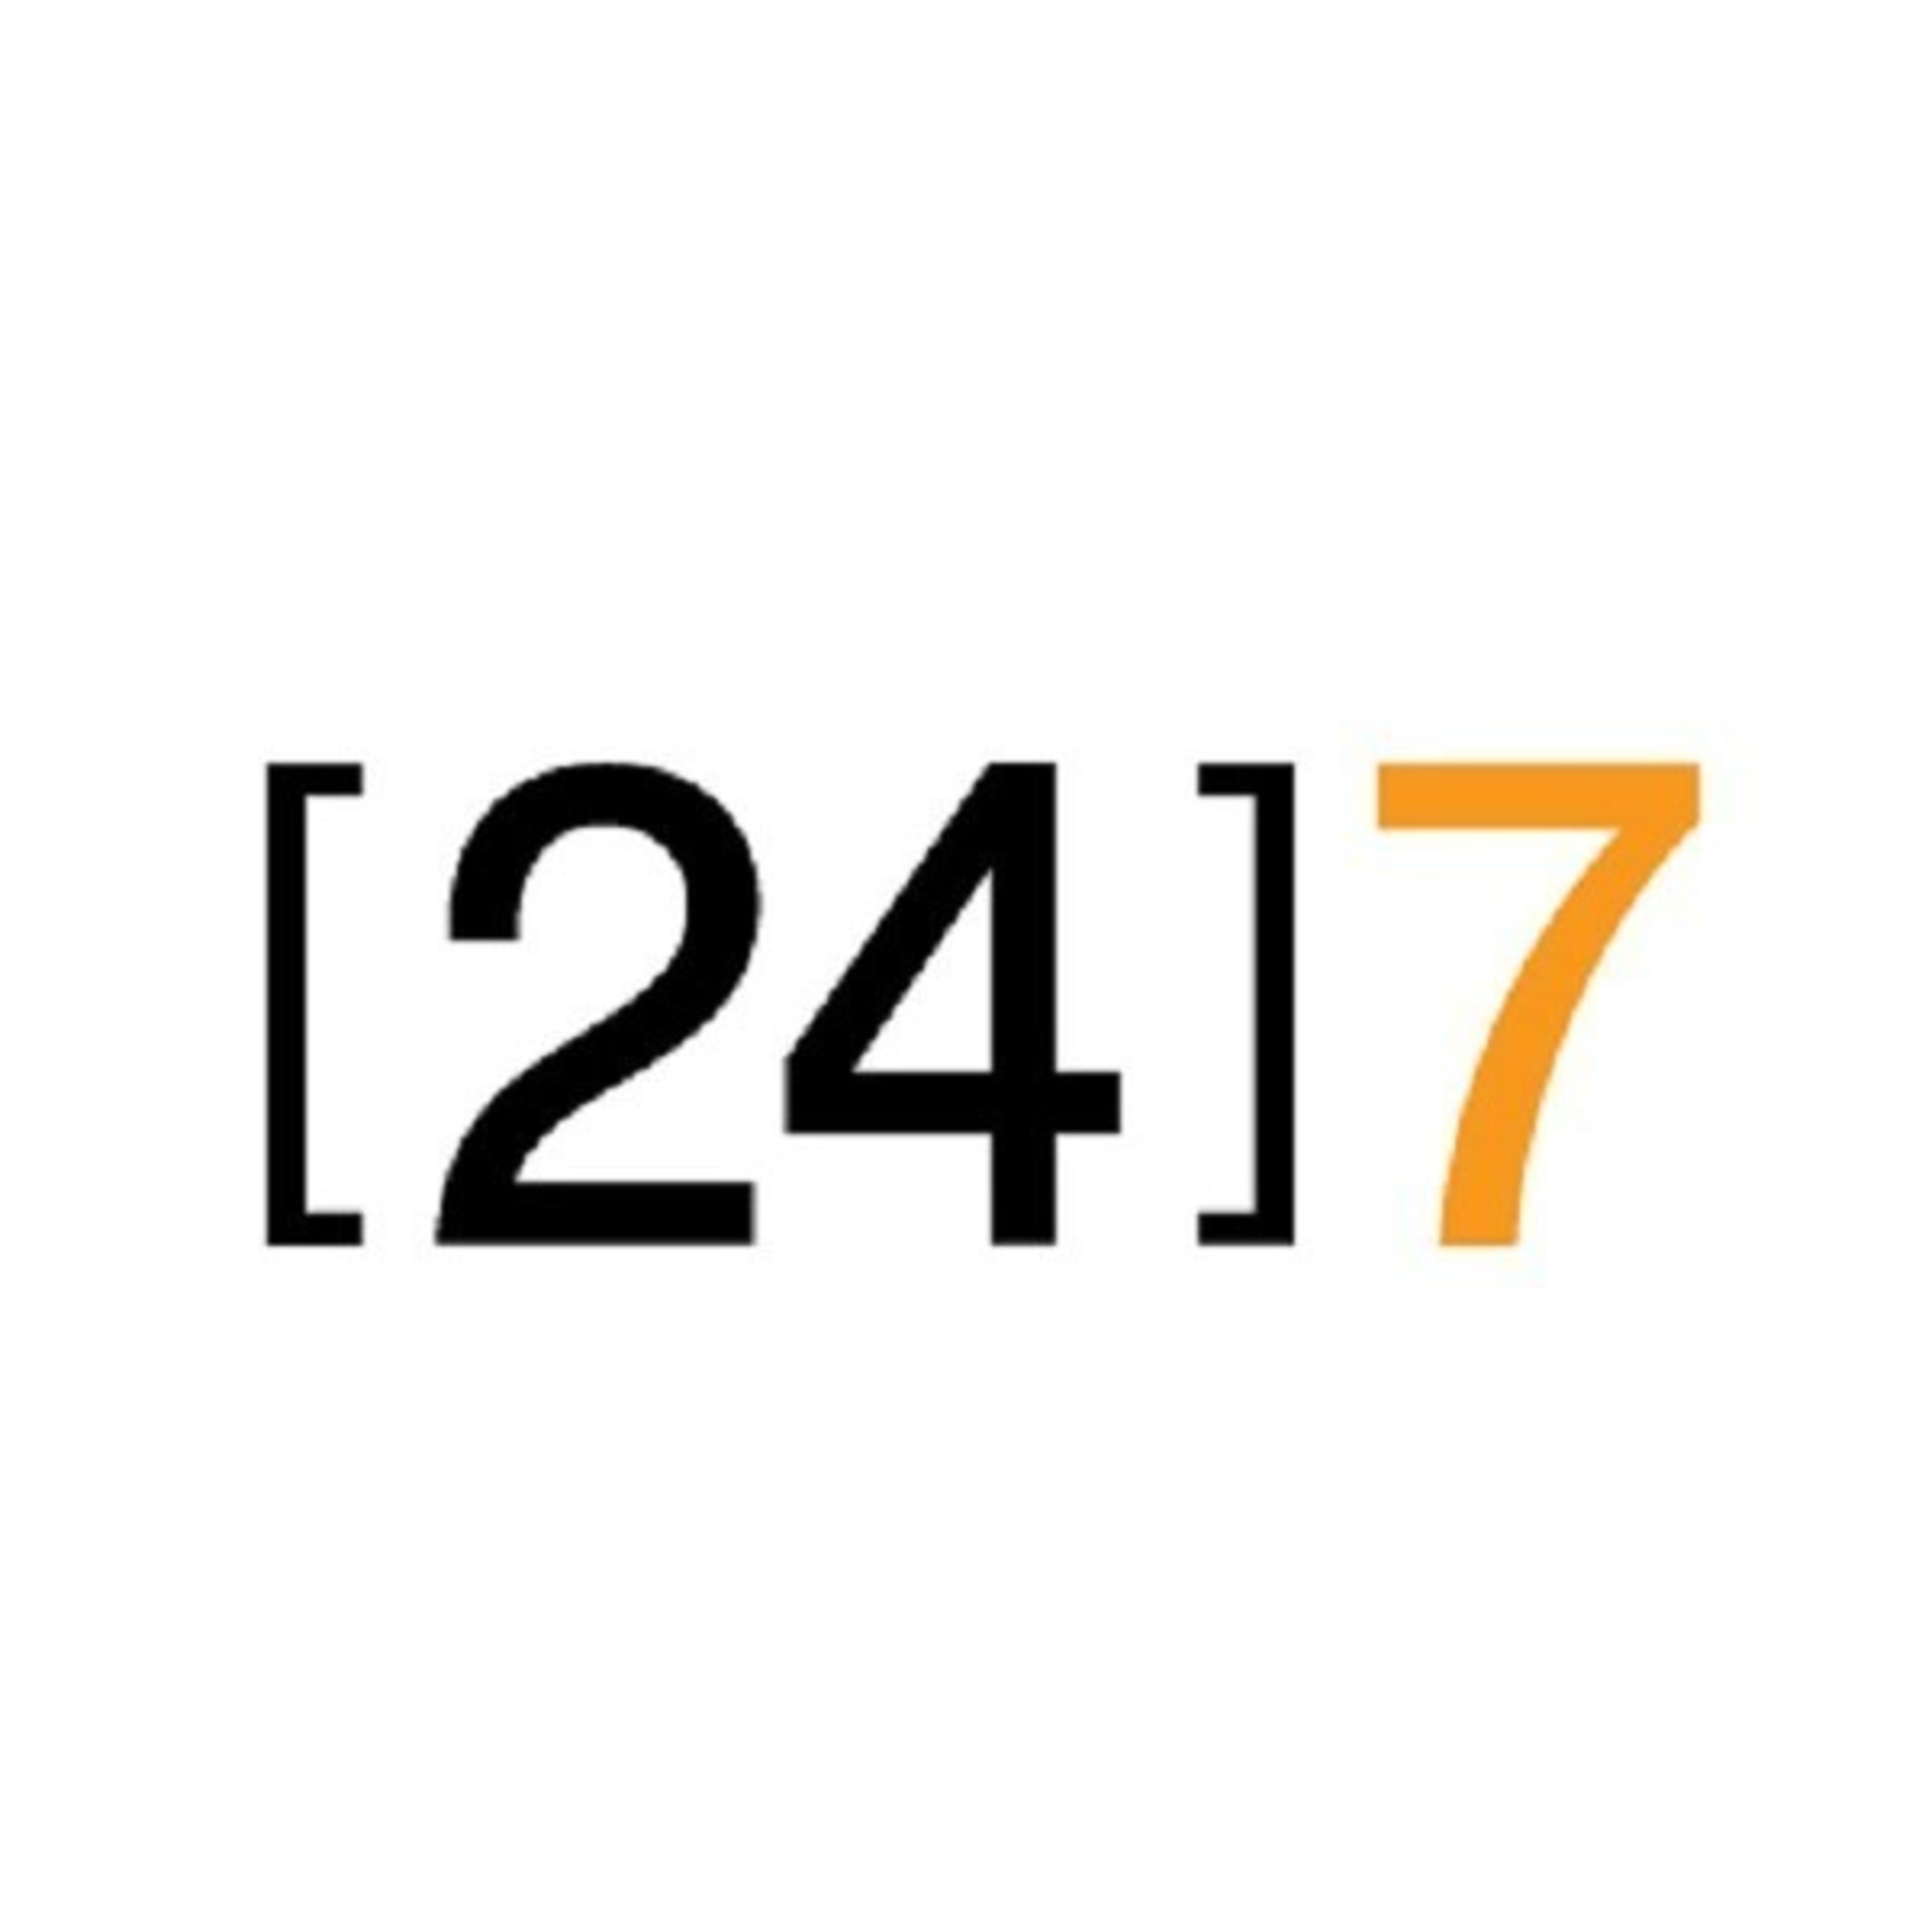 [24]7, a global leader in intent-driven customer engagement solutions